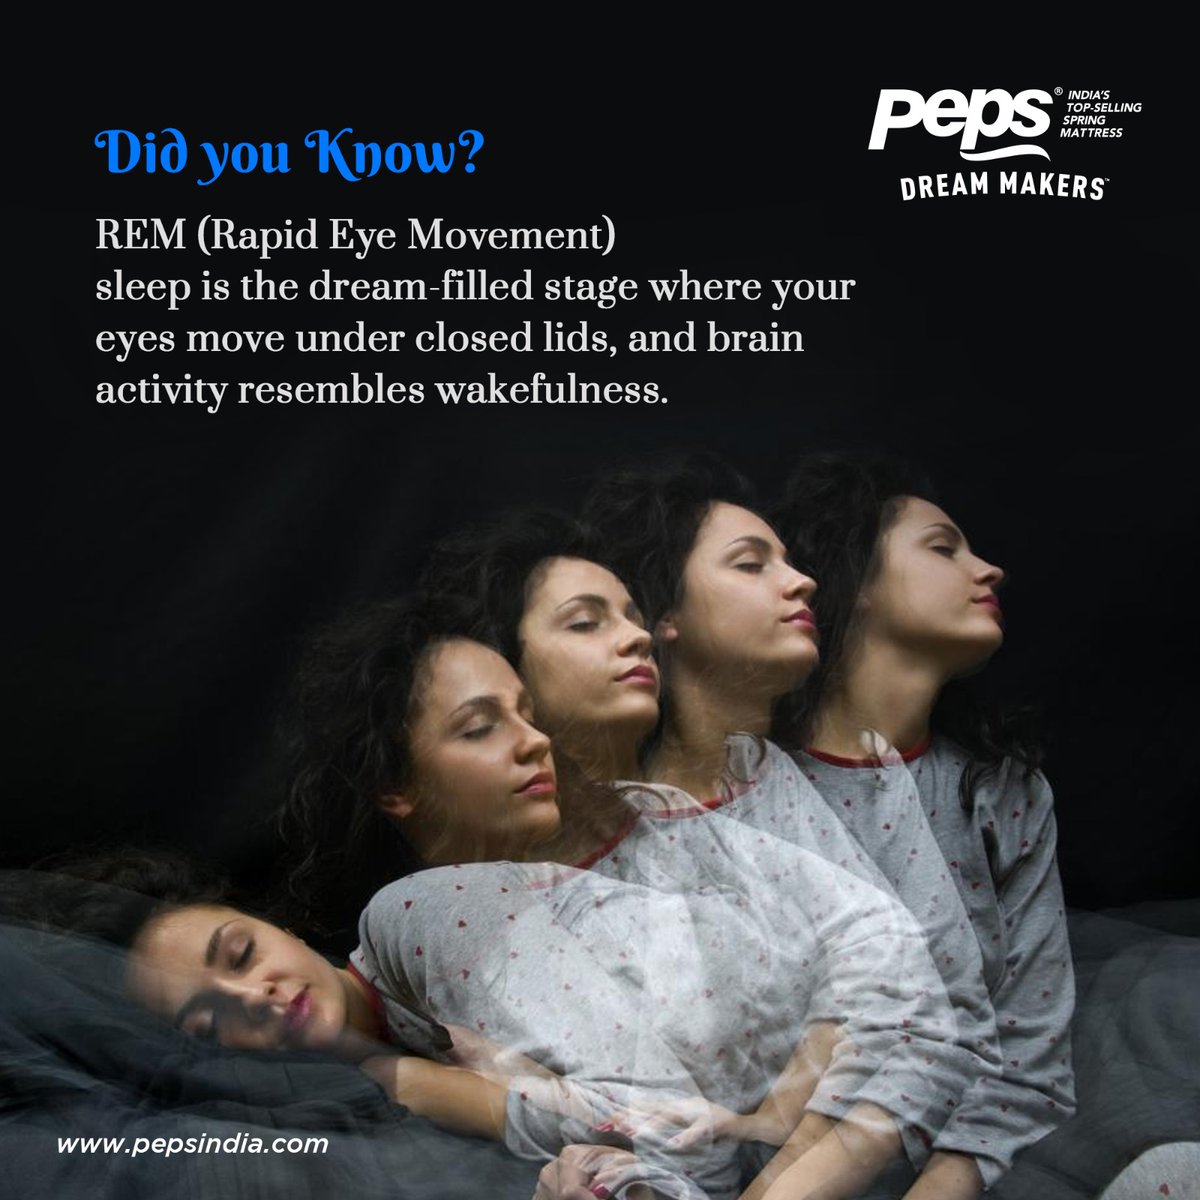 Stay tuned for more insights into the world of sleep and dreams!

#remsleep #sleepfacts #dreamfacts #dream #pepsindia #pepsmattress #pepsmattresses #dreammakers #dreamfilledsleep #dreaminsleep #rem